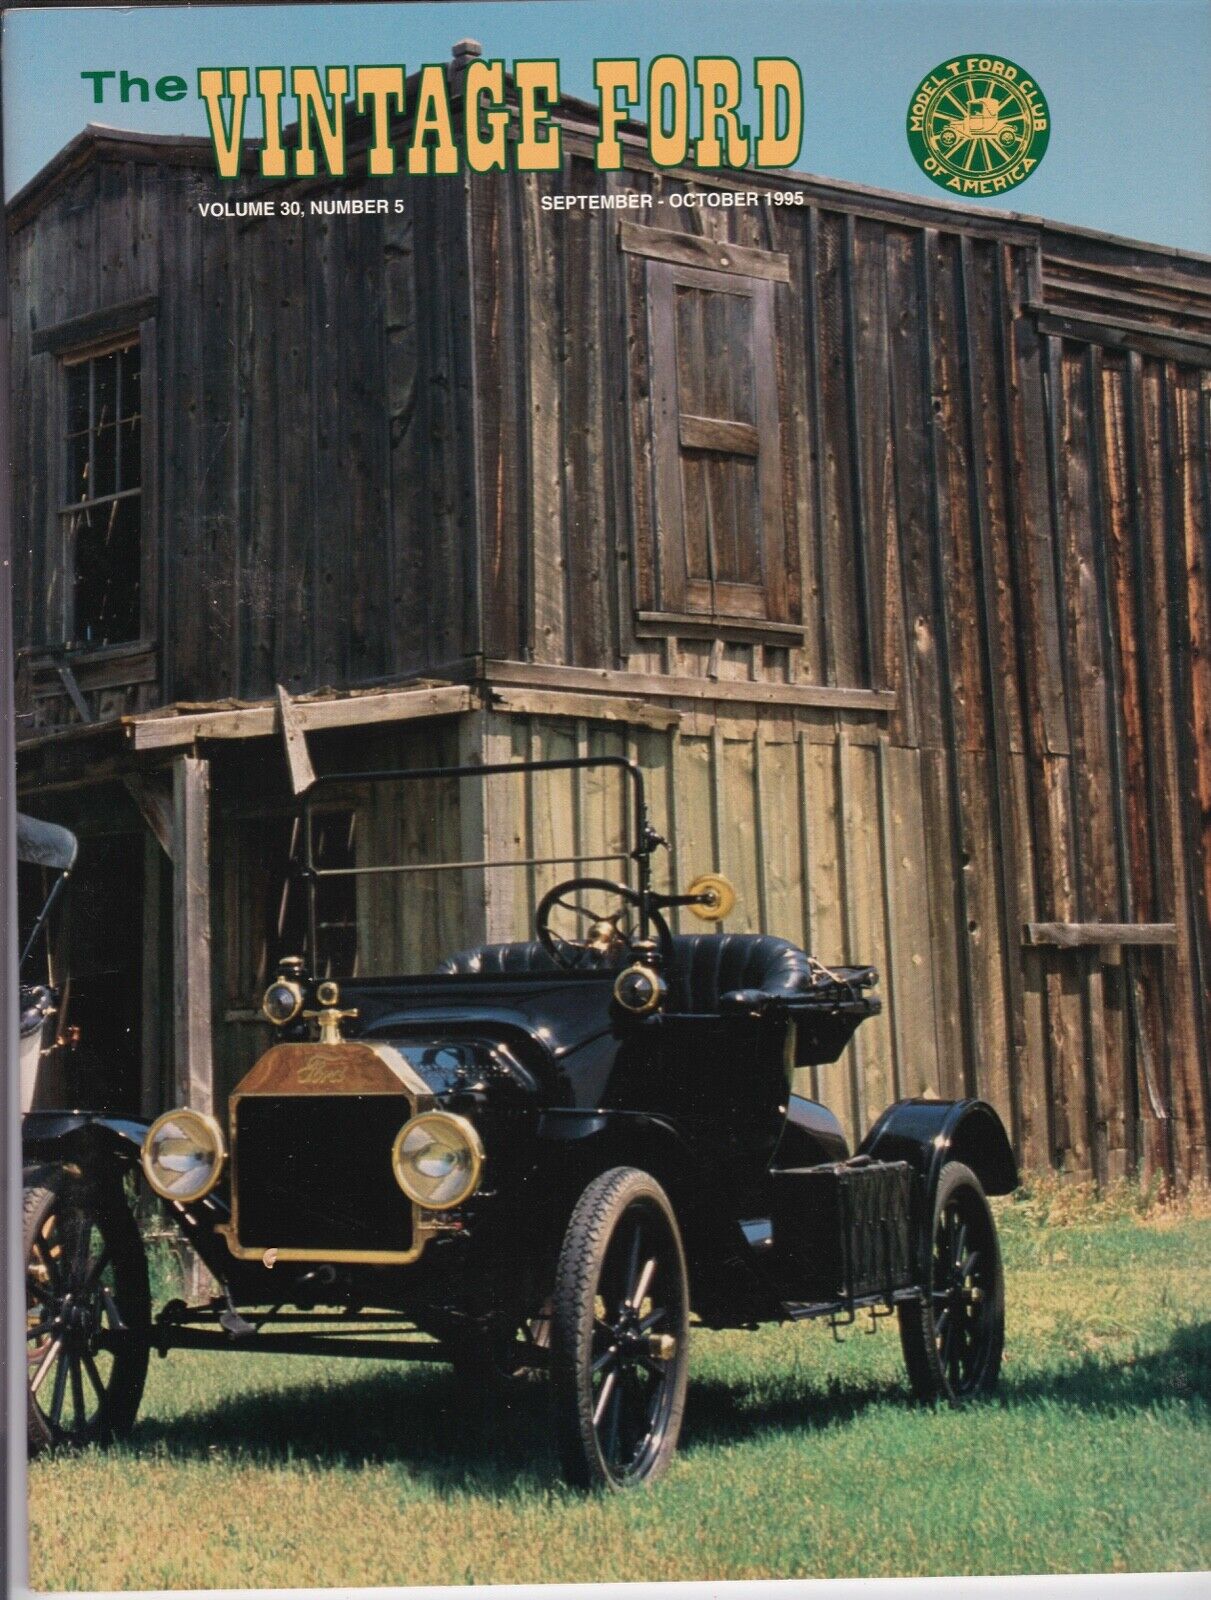 1910S ROADSTER RUNABOUT - THE VINTAGE FORD MAGAZINE - LONG BRANCH SALOON 